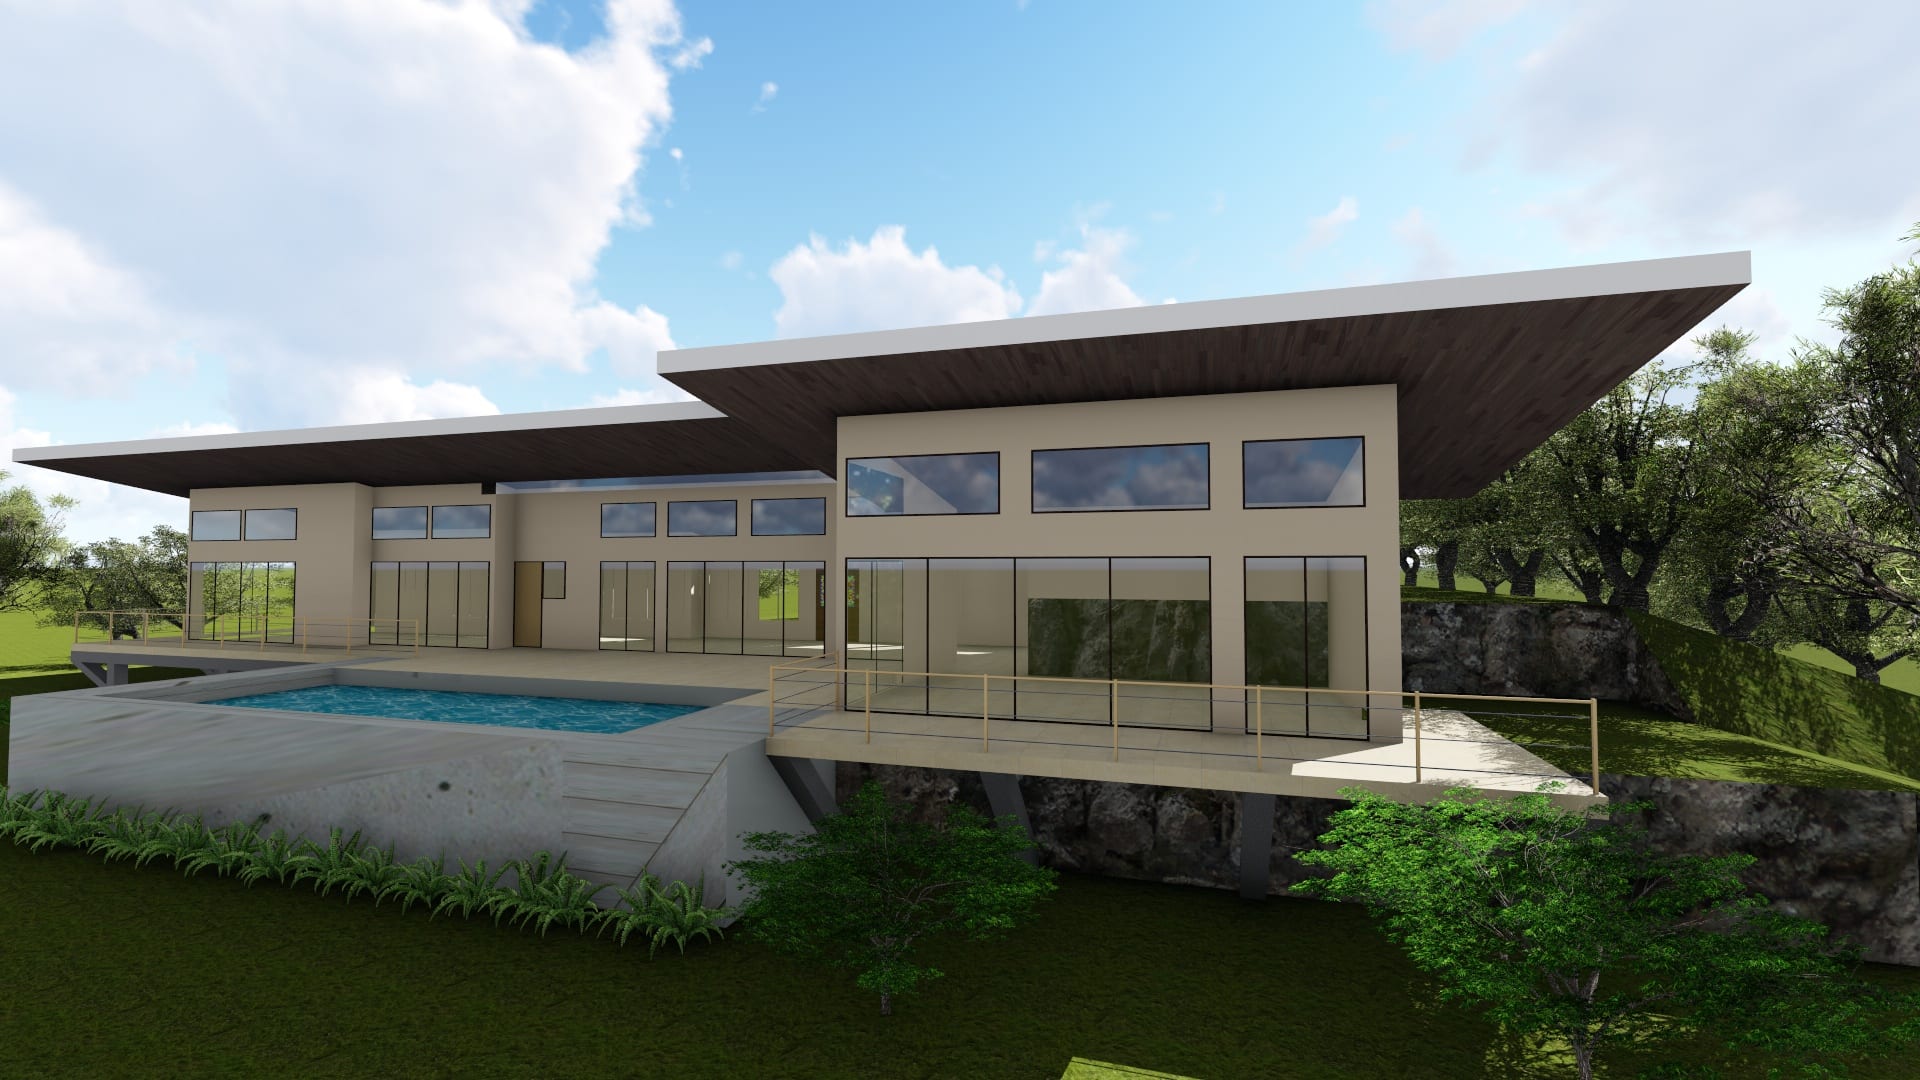 3.8 ACRES - 3 Bedroom Modern Tropical Home With Infinity Pool And Amazing Sunset Ocean Views!!!